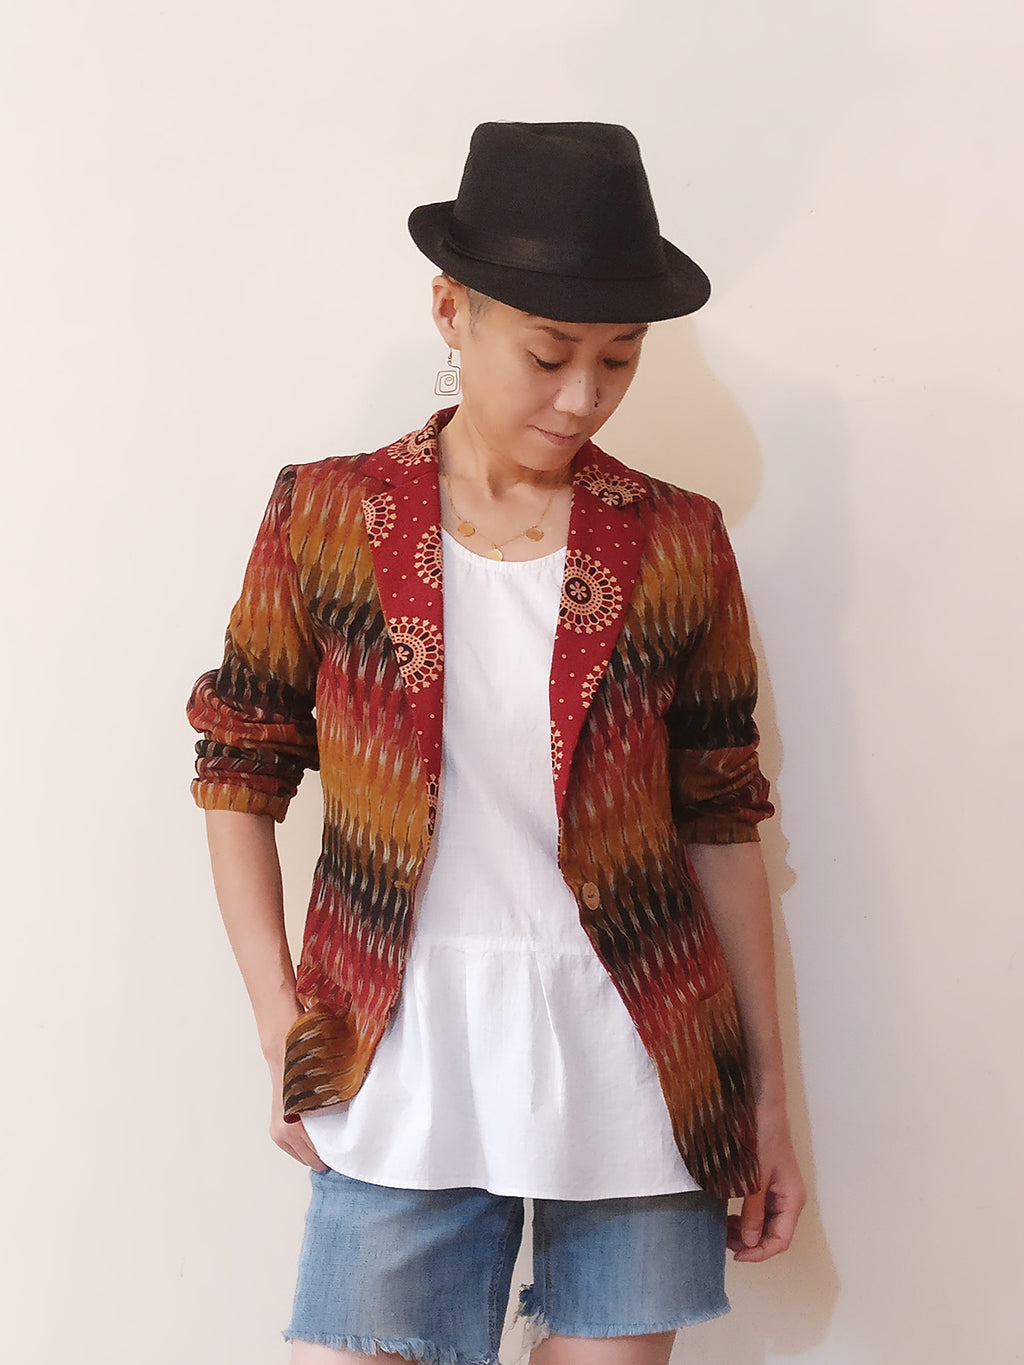 Cotton Ikat blazer with a genle maroon Ajrakh. Made from female body patterns, but anyone with any sex or gender please enjoy this jacket. Buy online.